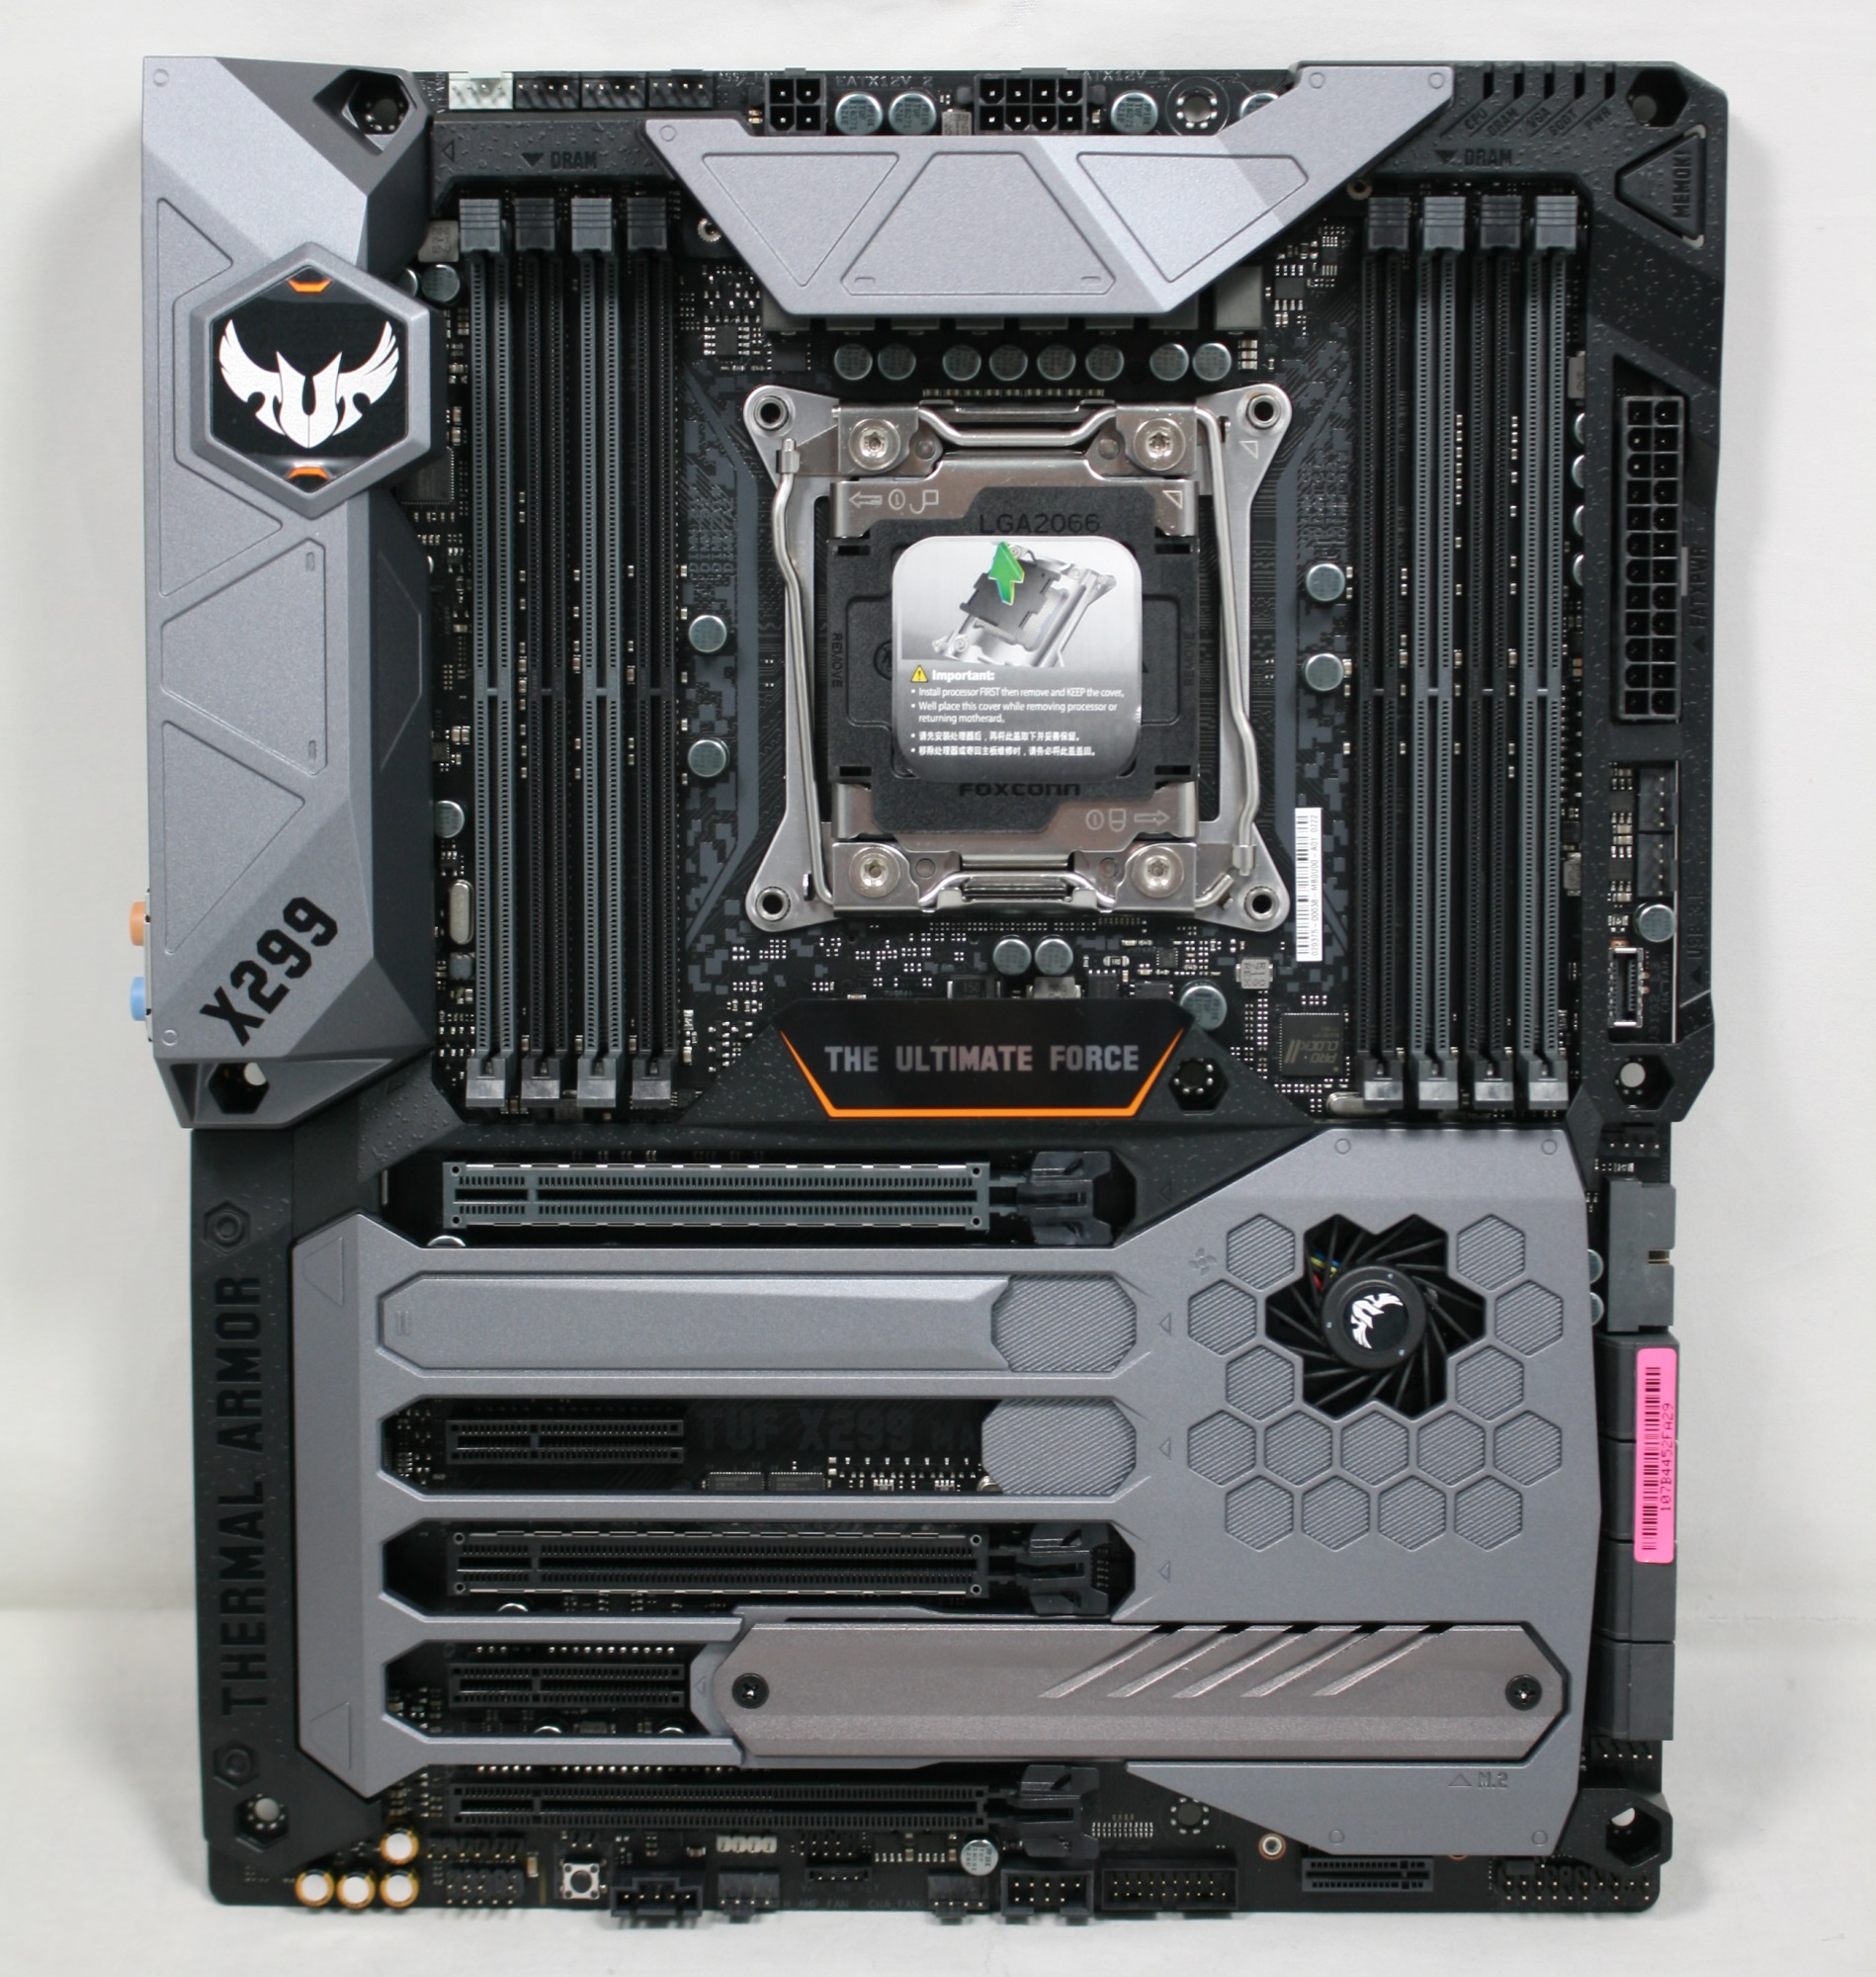 Visual Inspection - The ASUS TUF X299 Mark I Motherboard Review